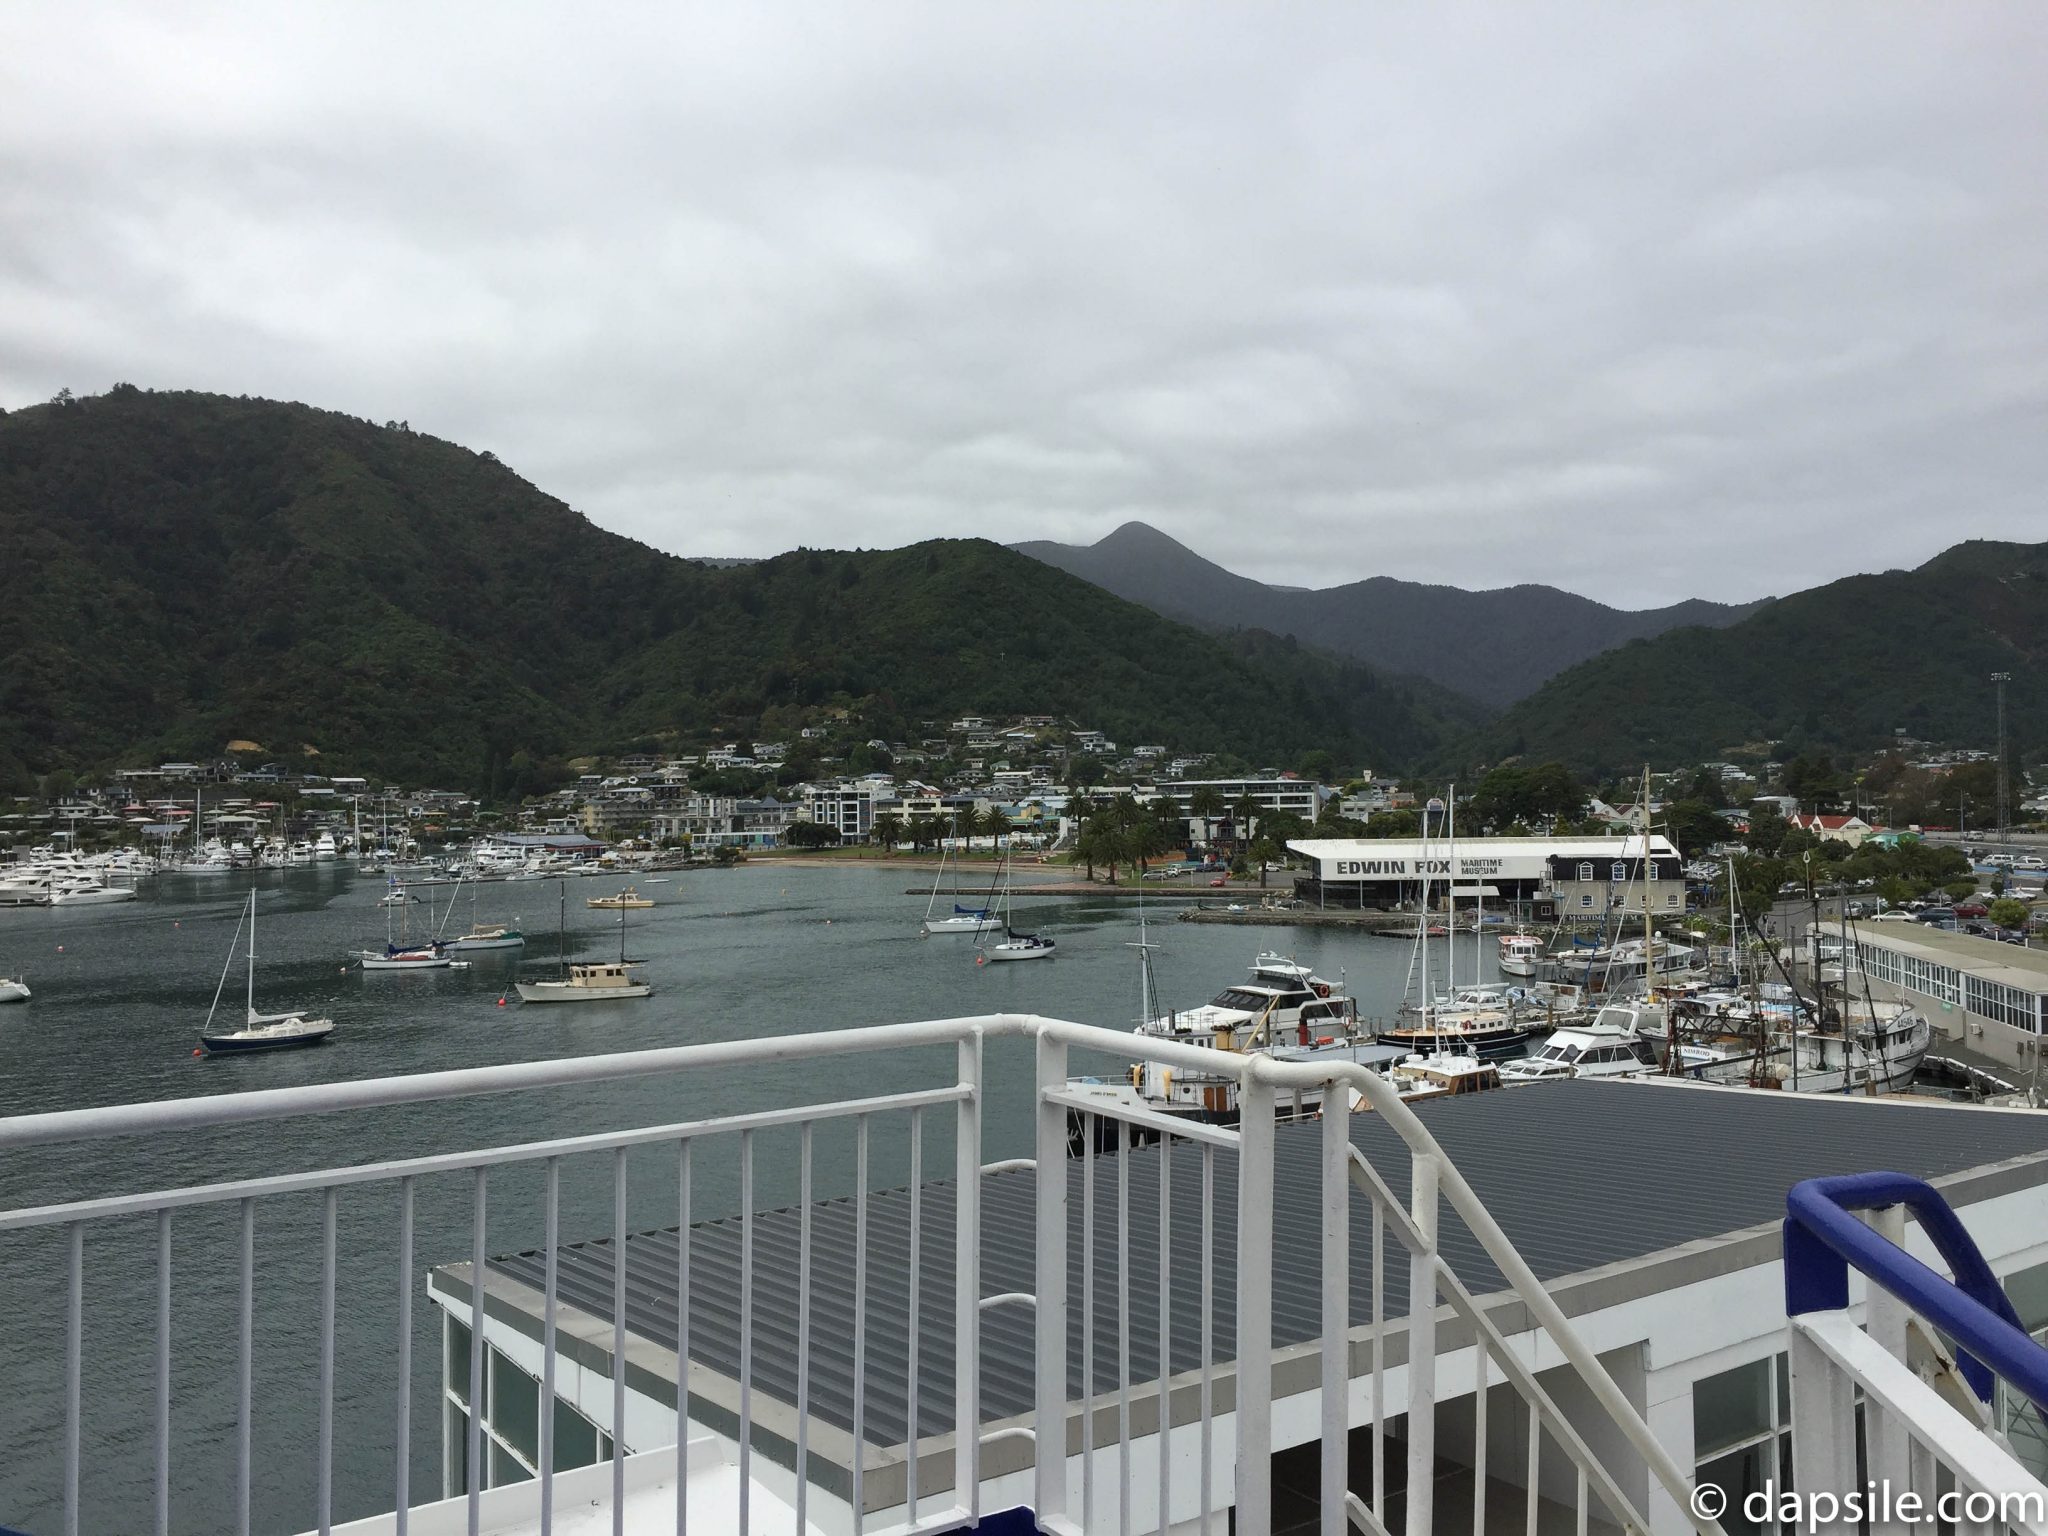 view of Picton New Zealand, mountains, ocean, and boats in the water from the ferry